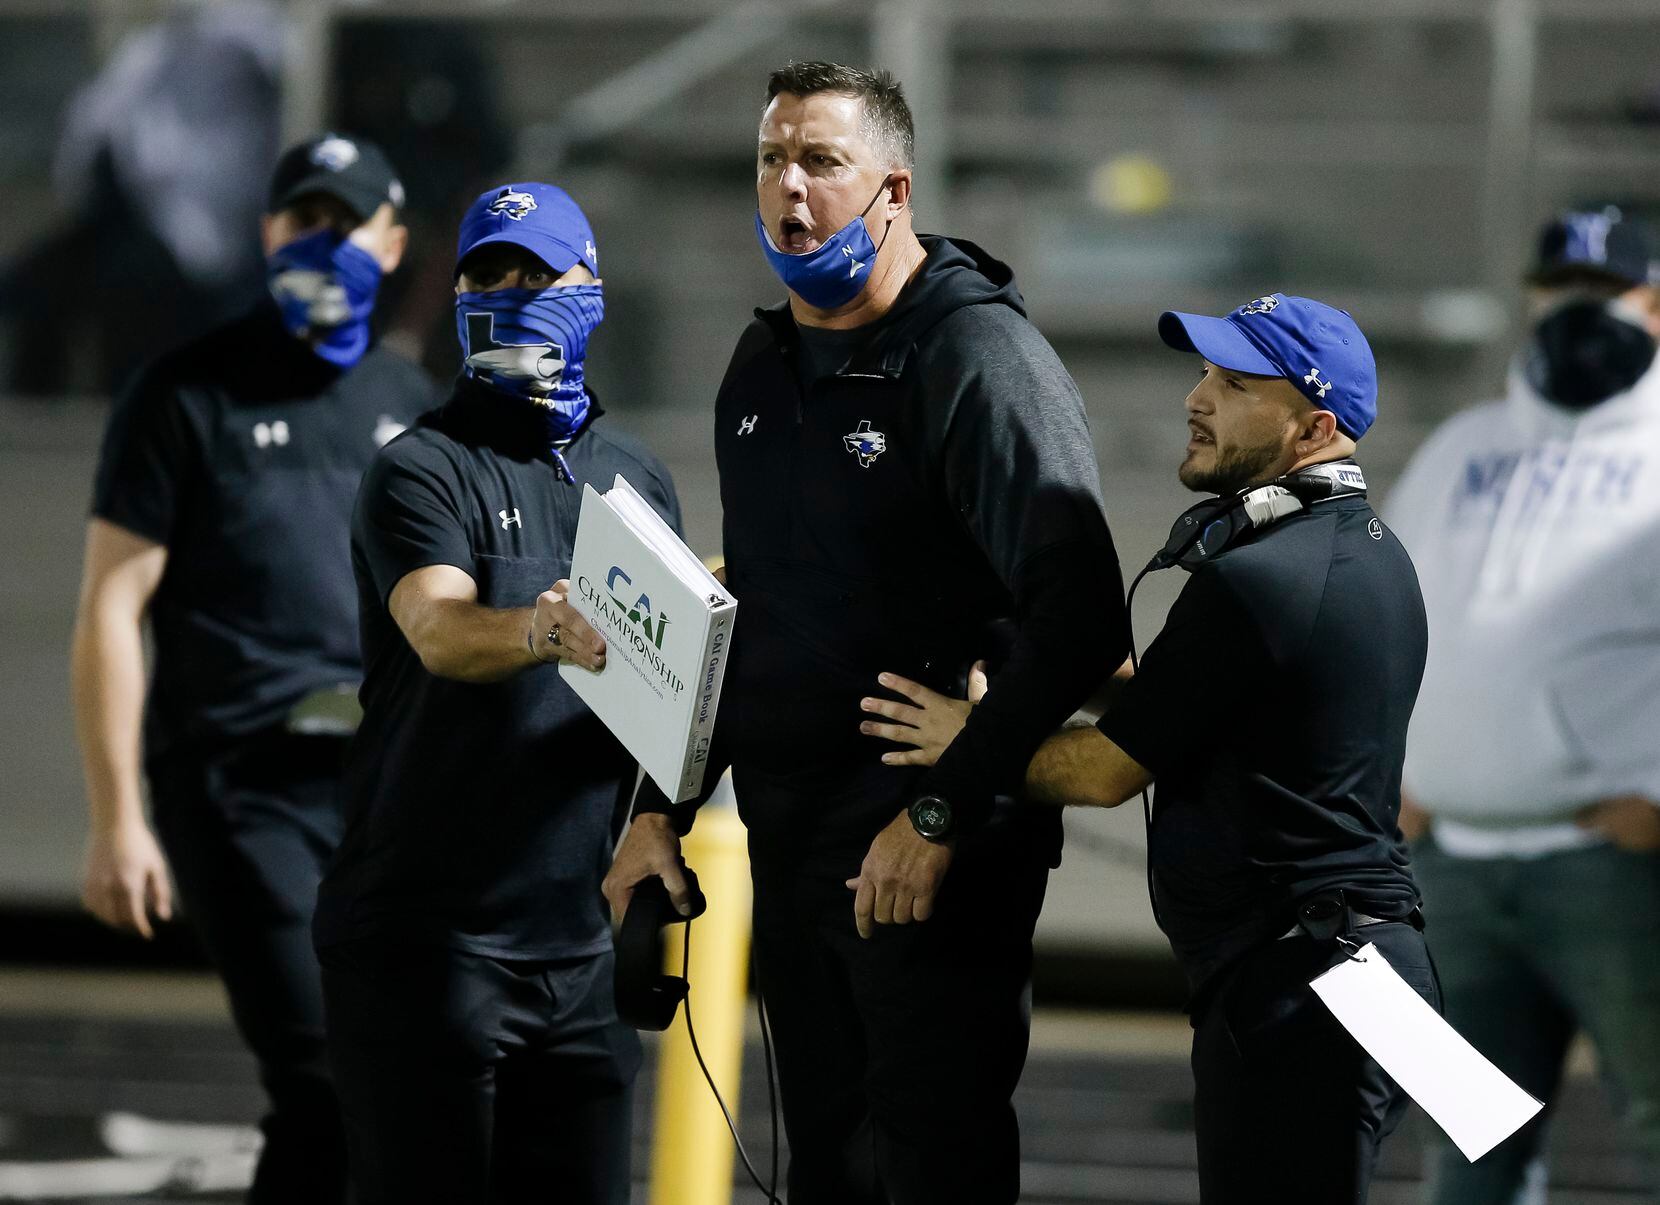 North Forney head coach Randy Jackson, center, is held back by assistant coaches while...